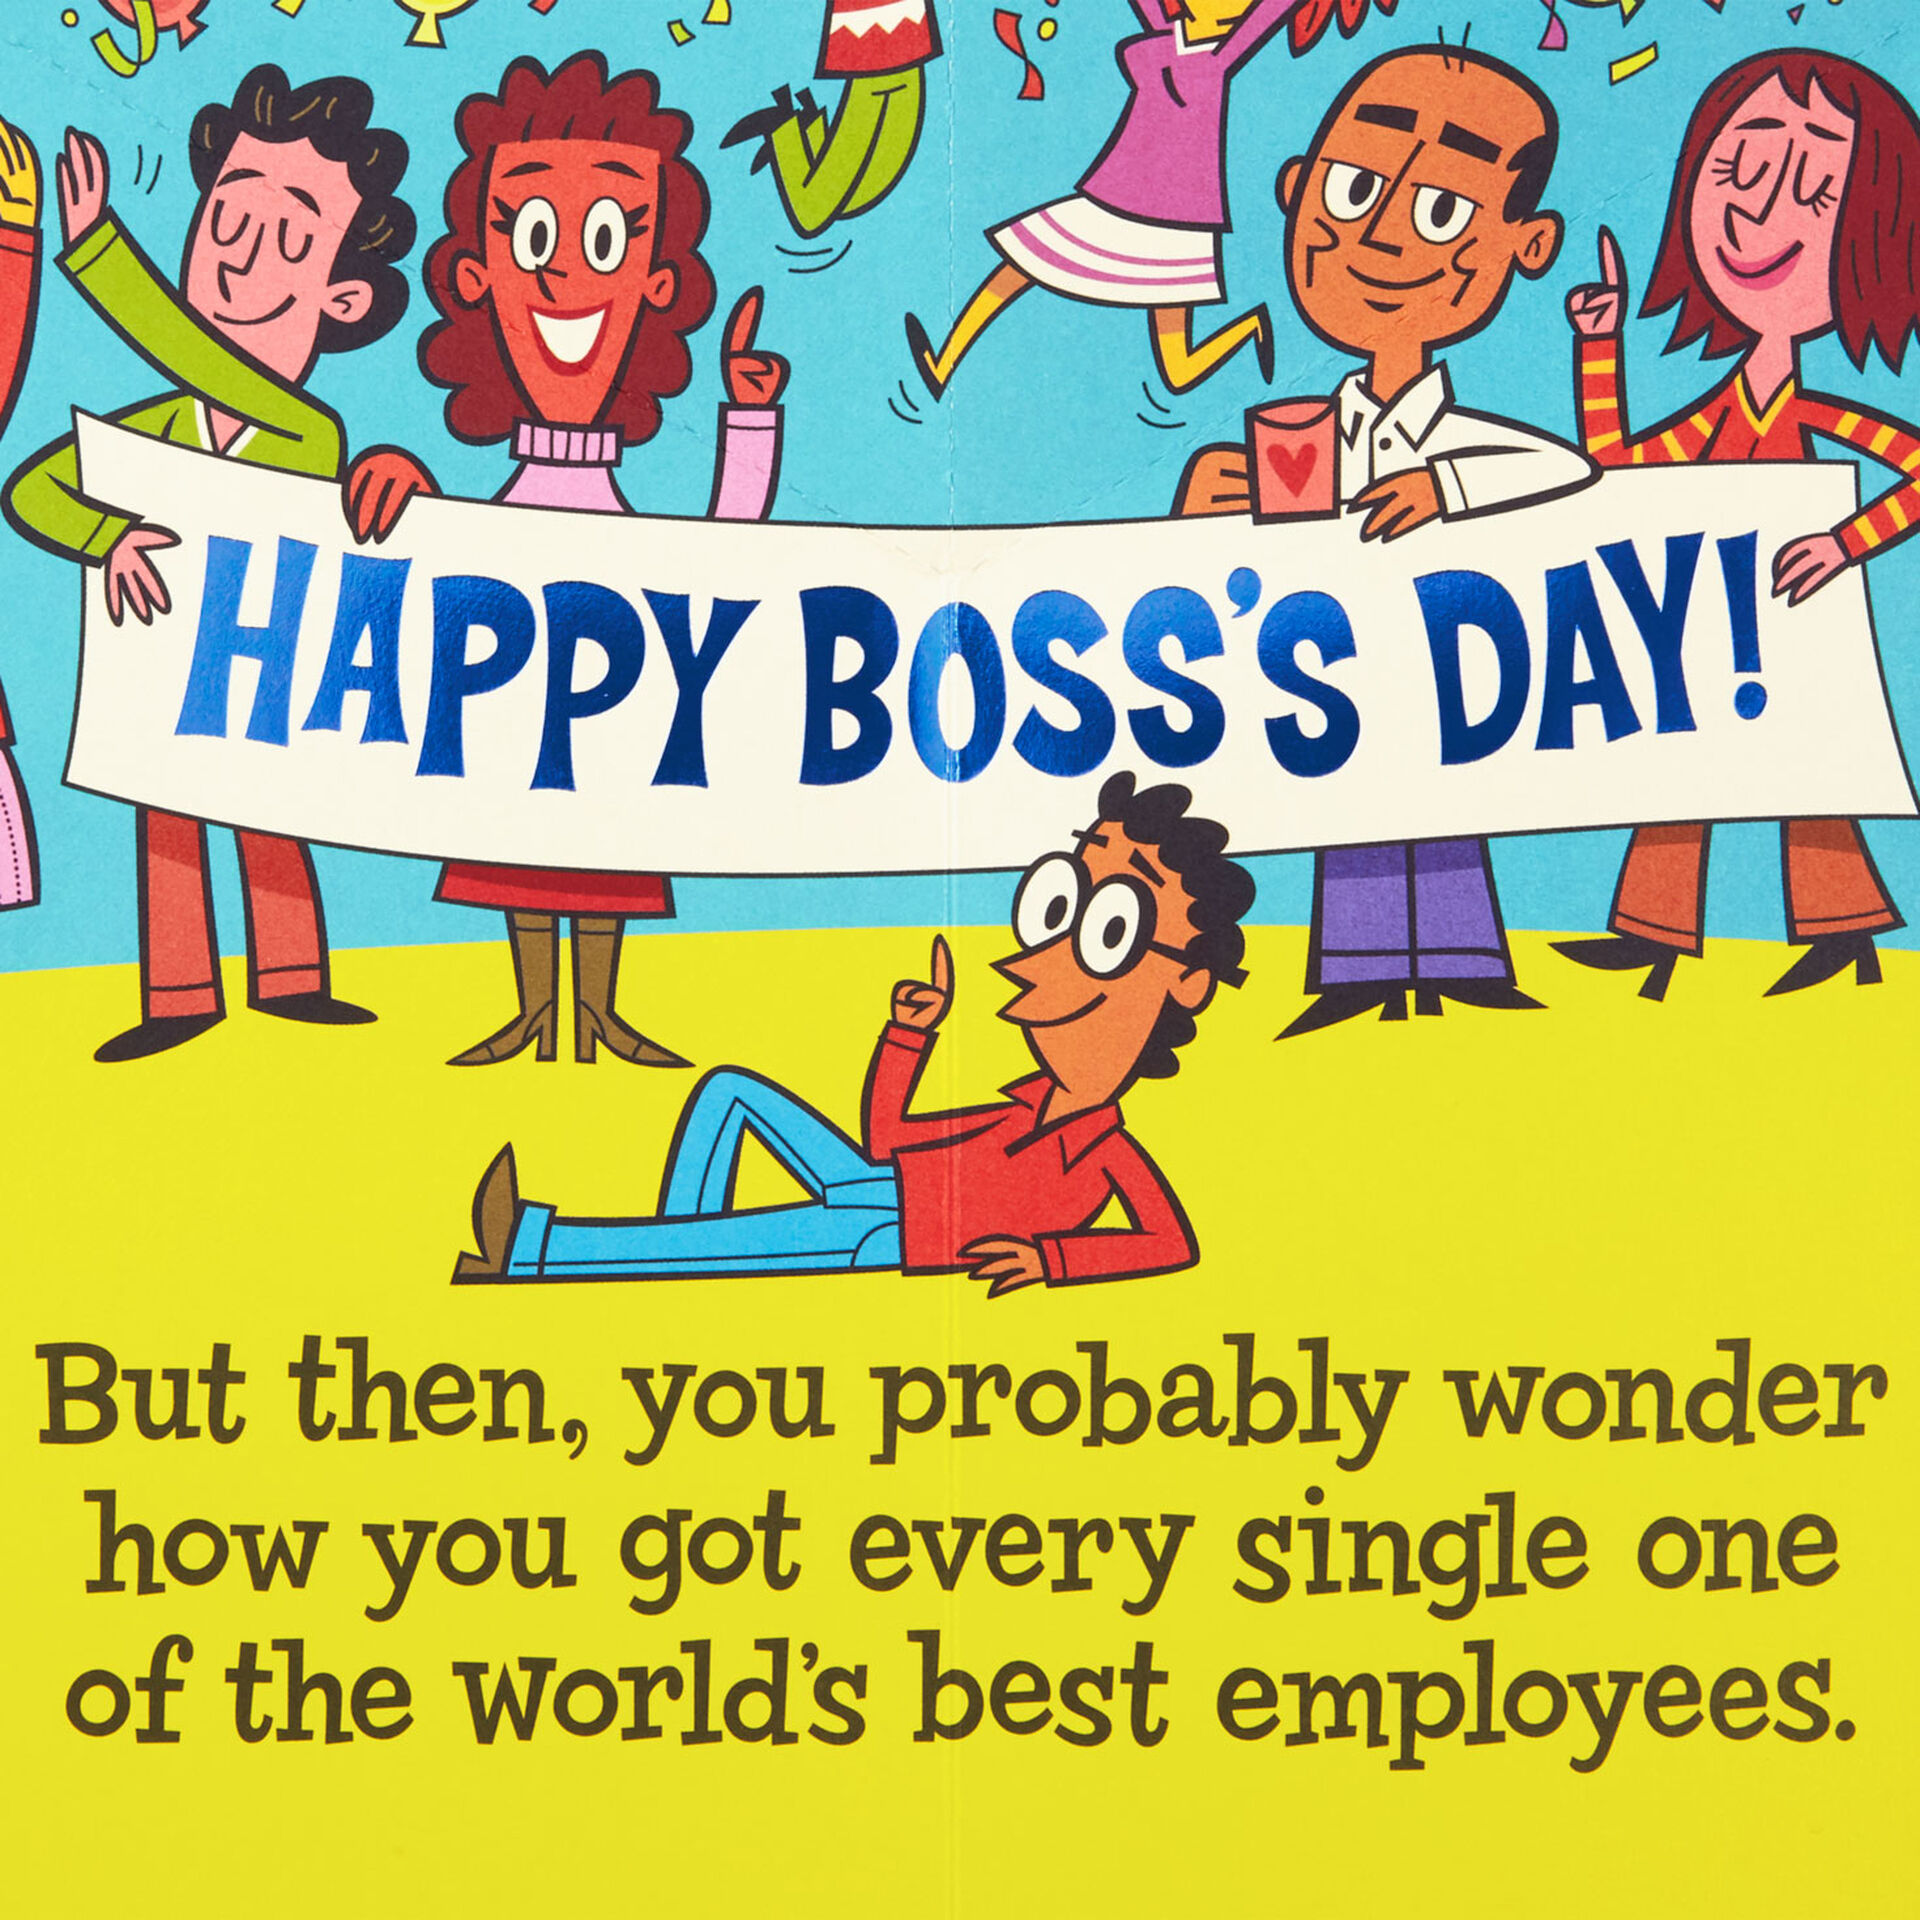 Worlds Best Boss And Employees Funny Bosss Day Card From Us